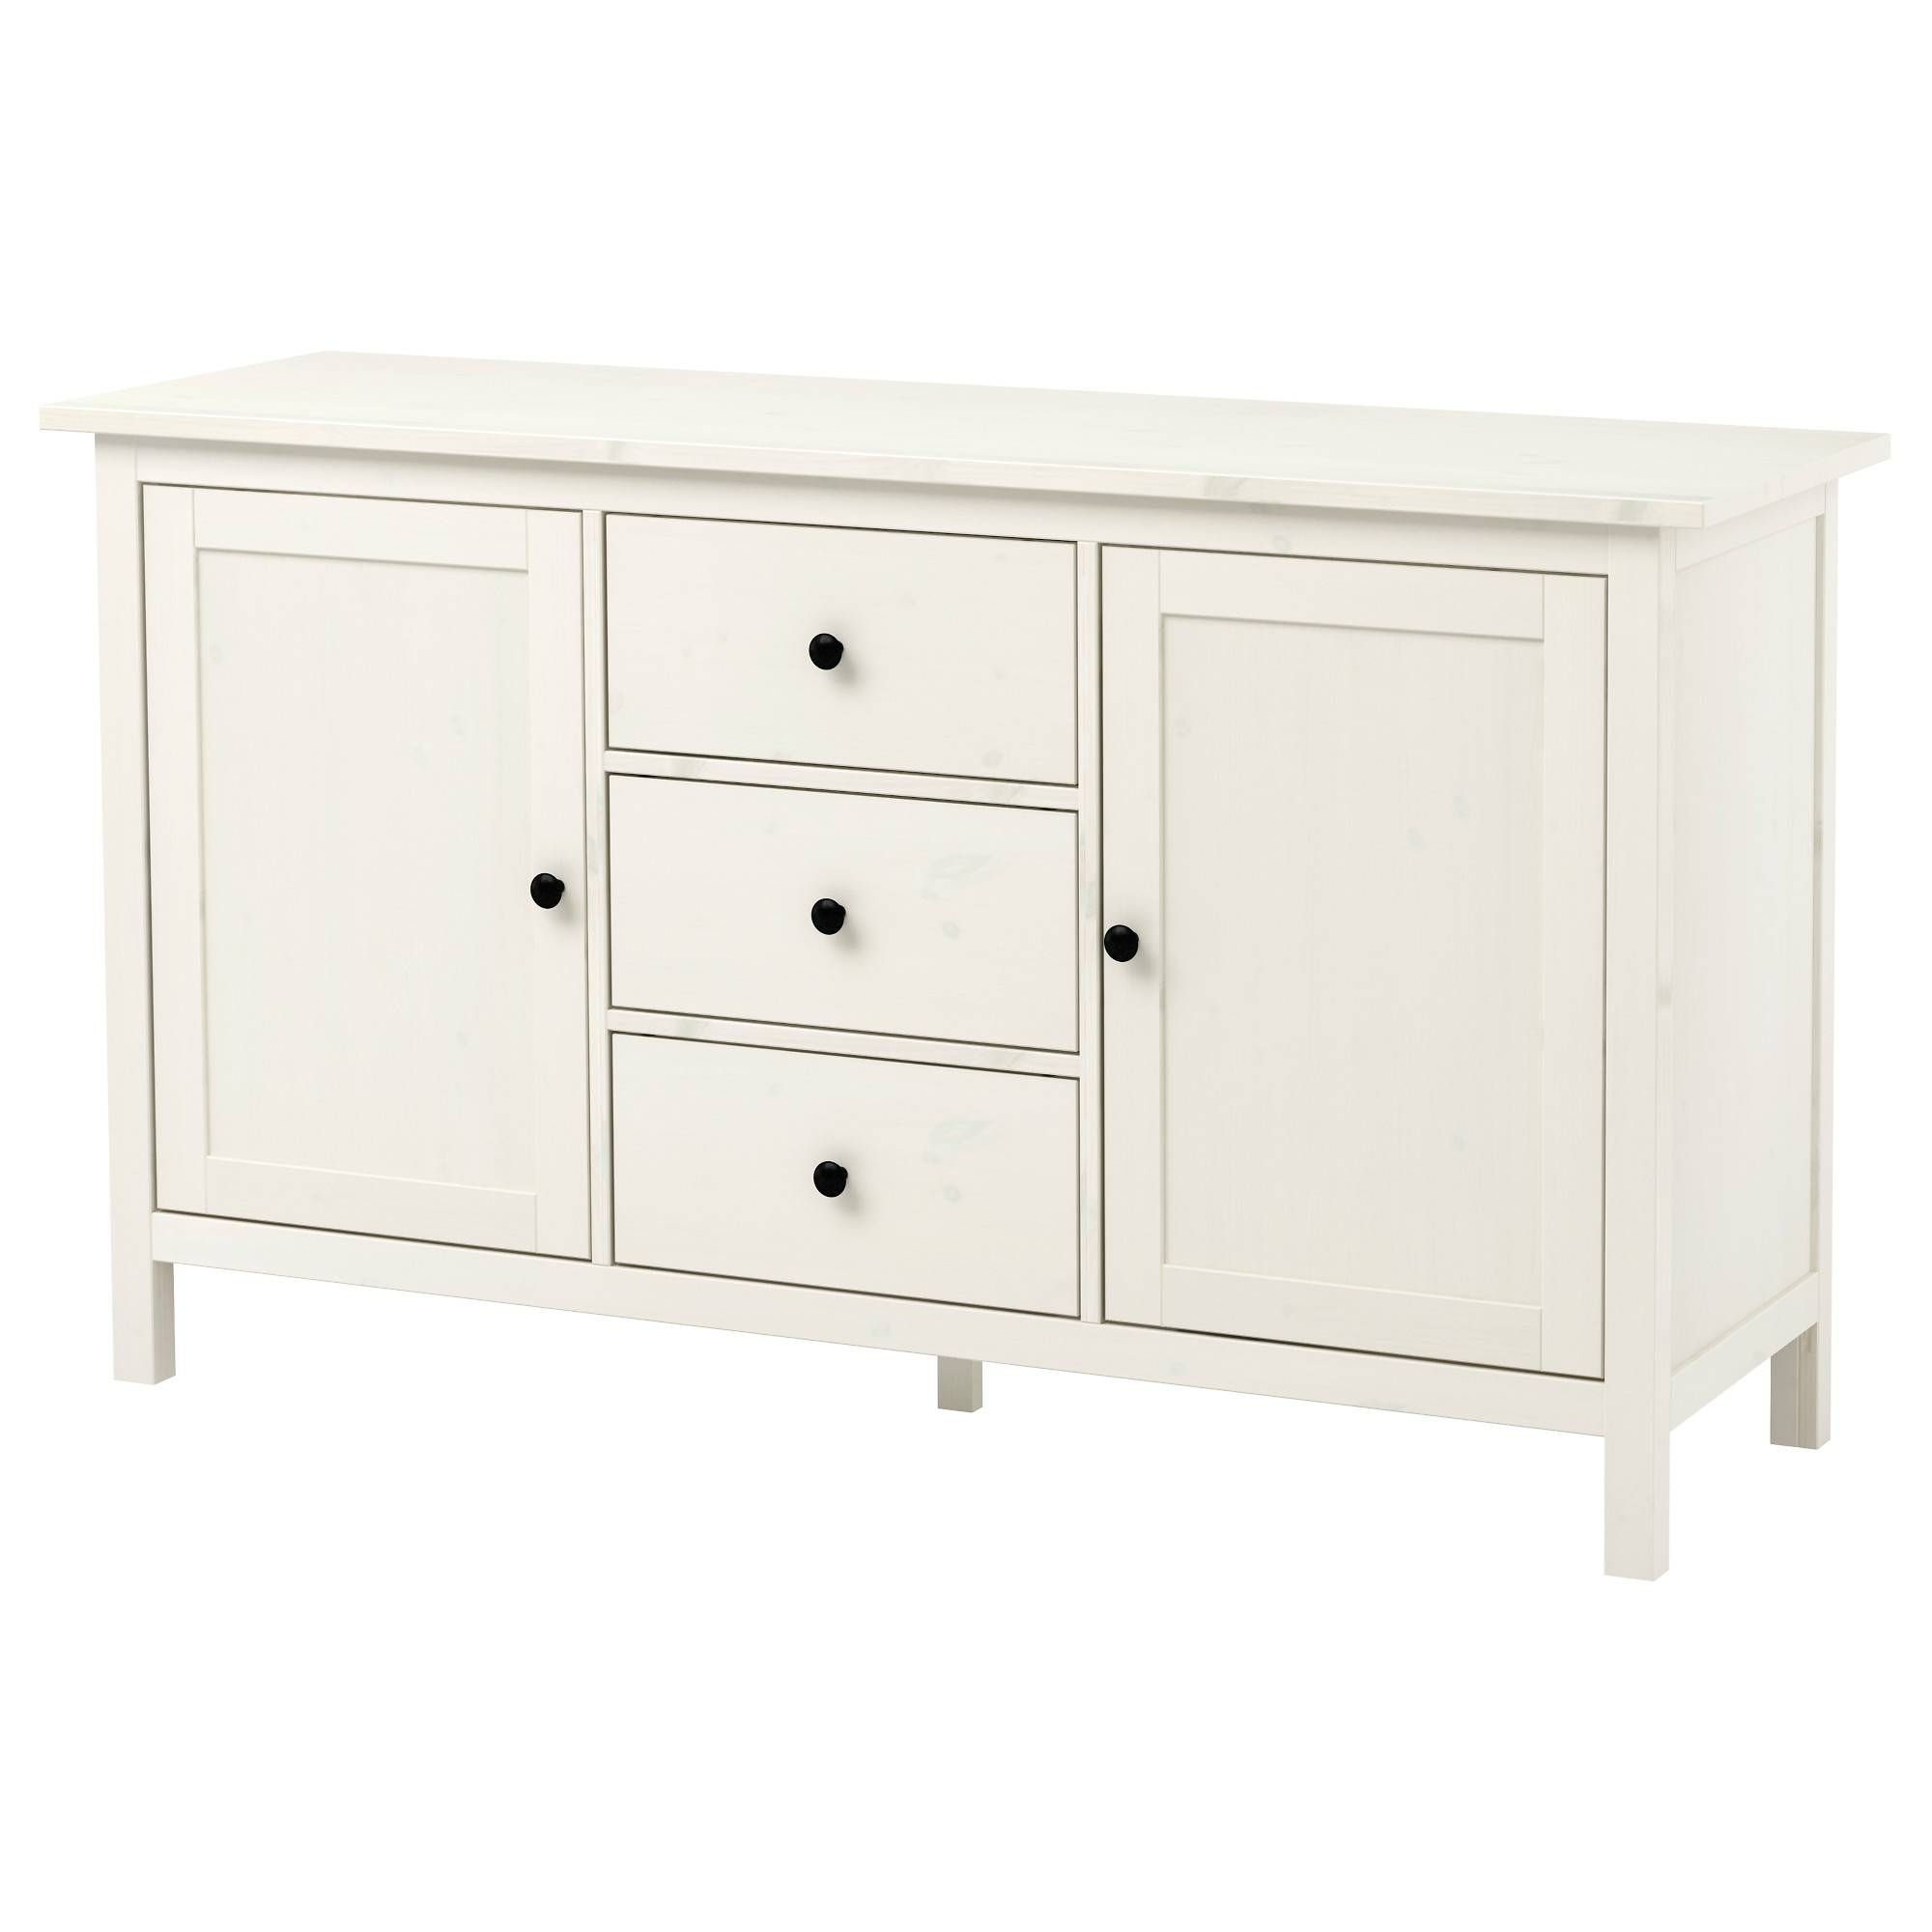 Hemnes Sideboard – White Stain – Ikea For Thin White Sideboards (View 2 of 15)